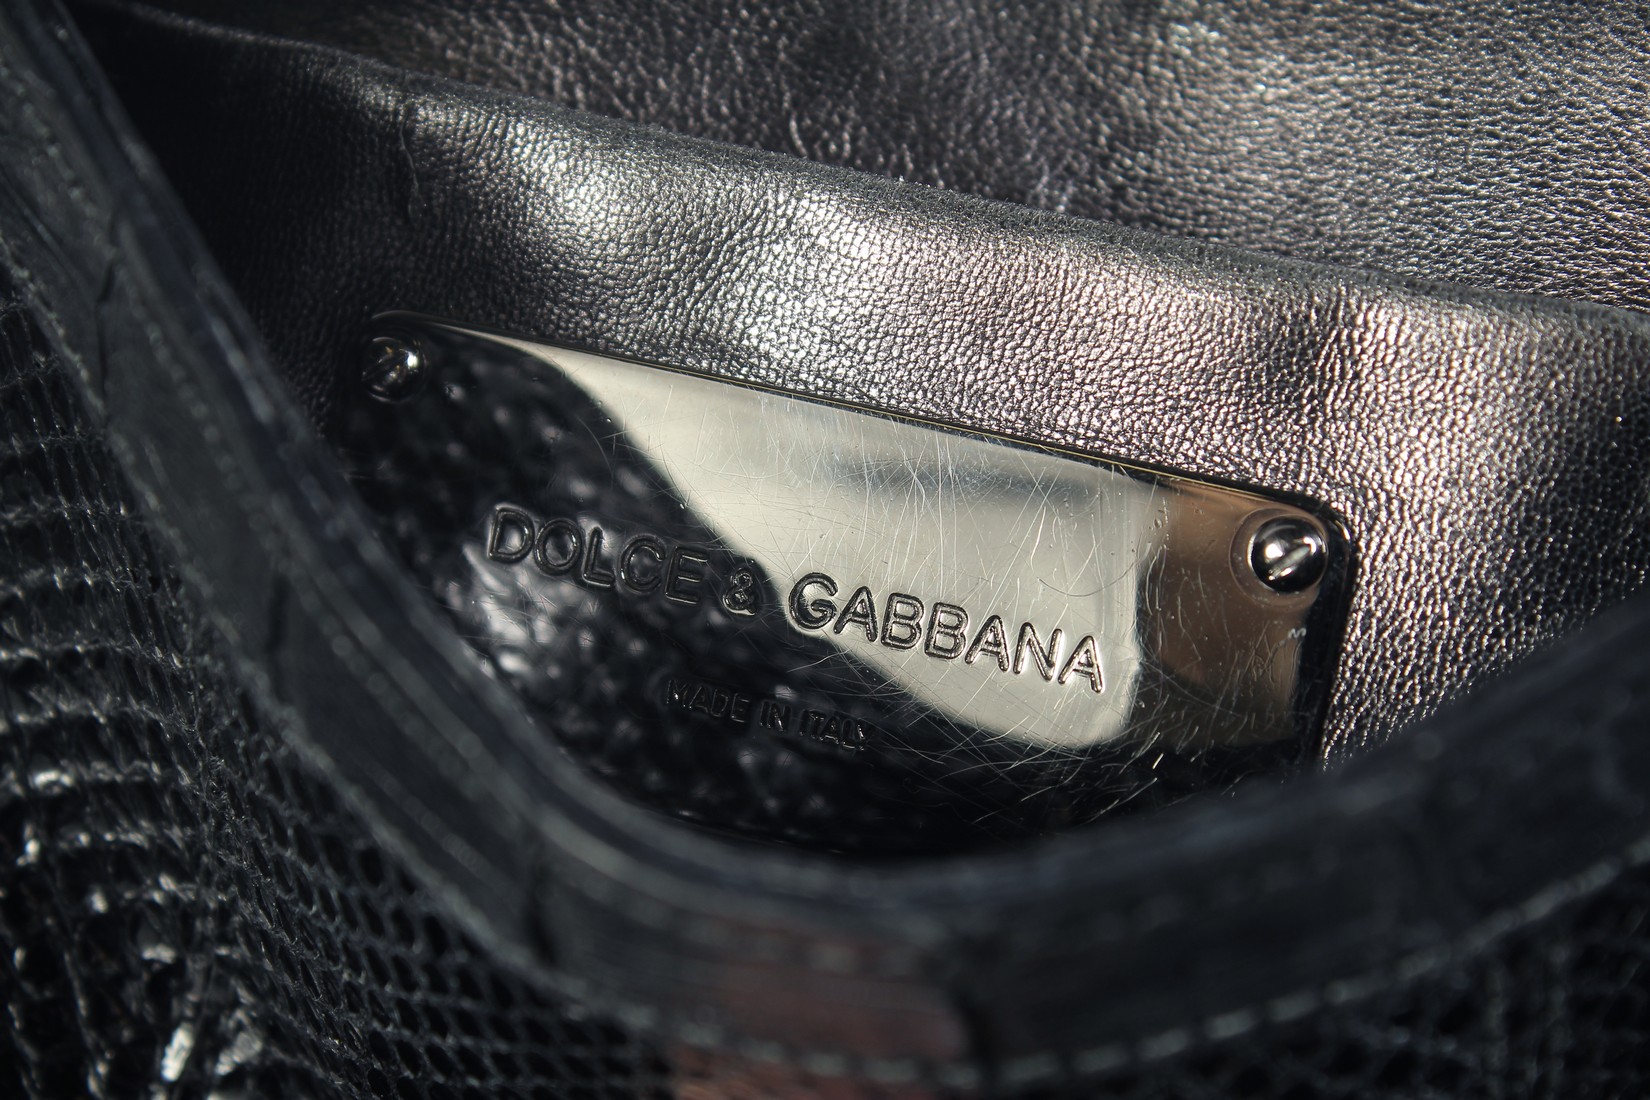 A GOOD DOLCE AND GABBANA BLACK CROCODILE OR SNAKESKIN BAG. 9ins long, 7ins high, in a dust bag. - Image 6 of 7